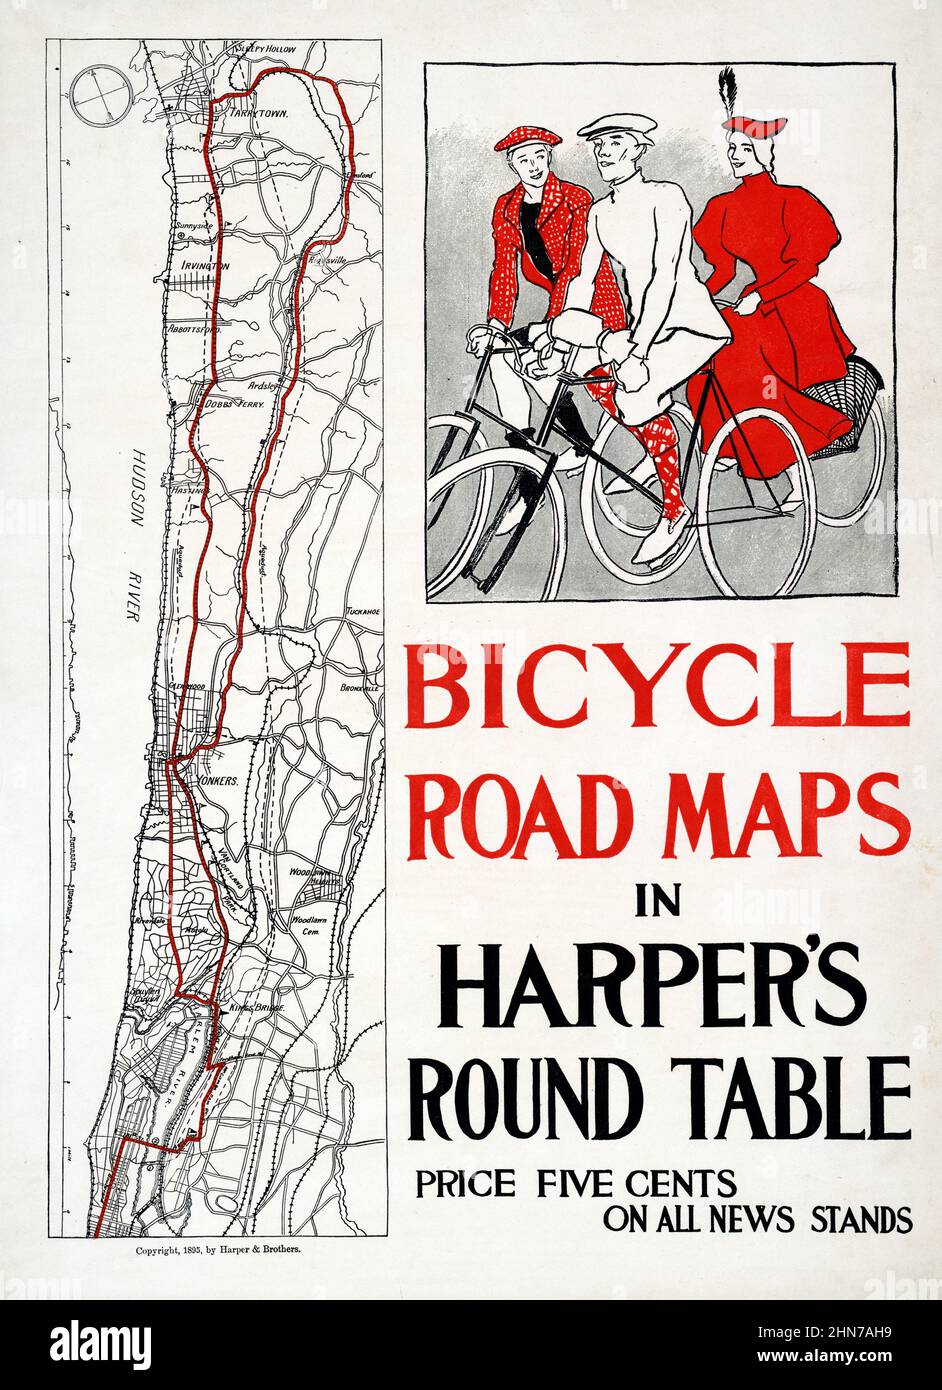 Bicycle road maps in Harpers Round Table (1895). Vintage bicycle advertisement poster. Stock Photo